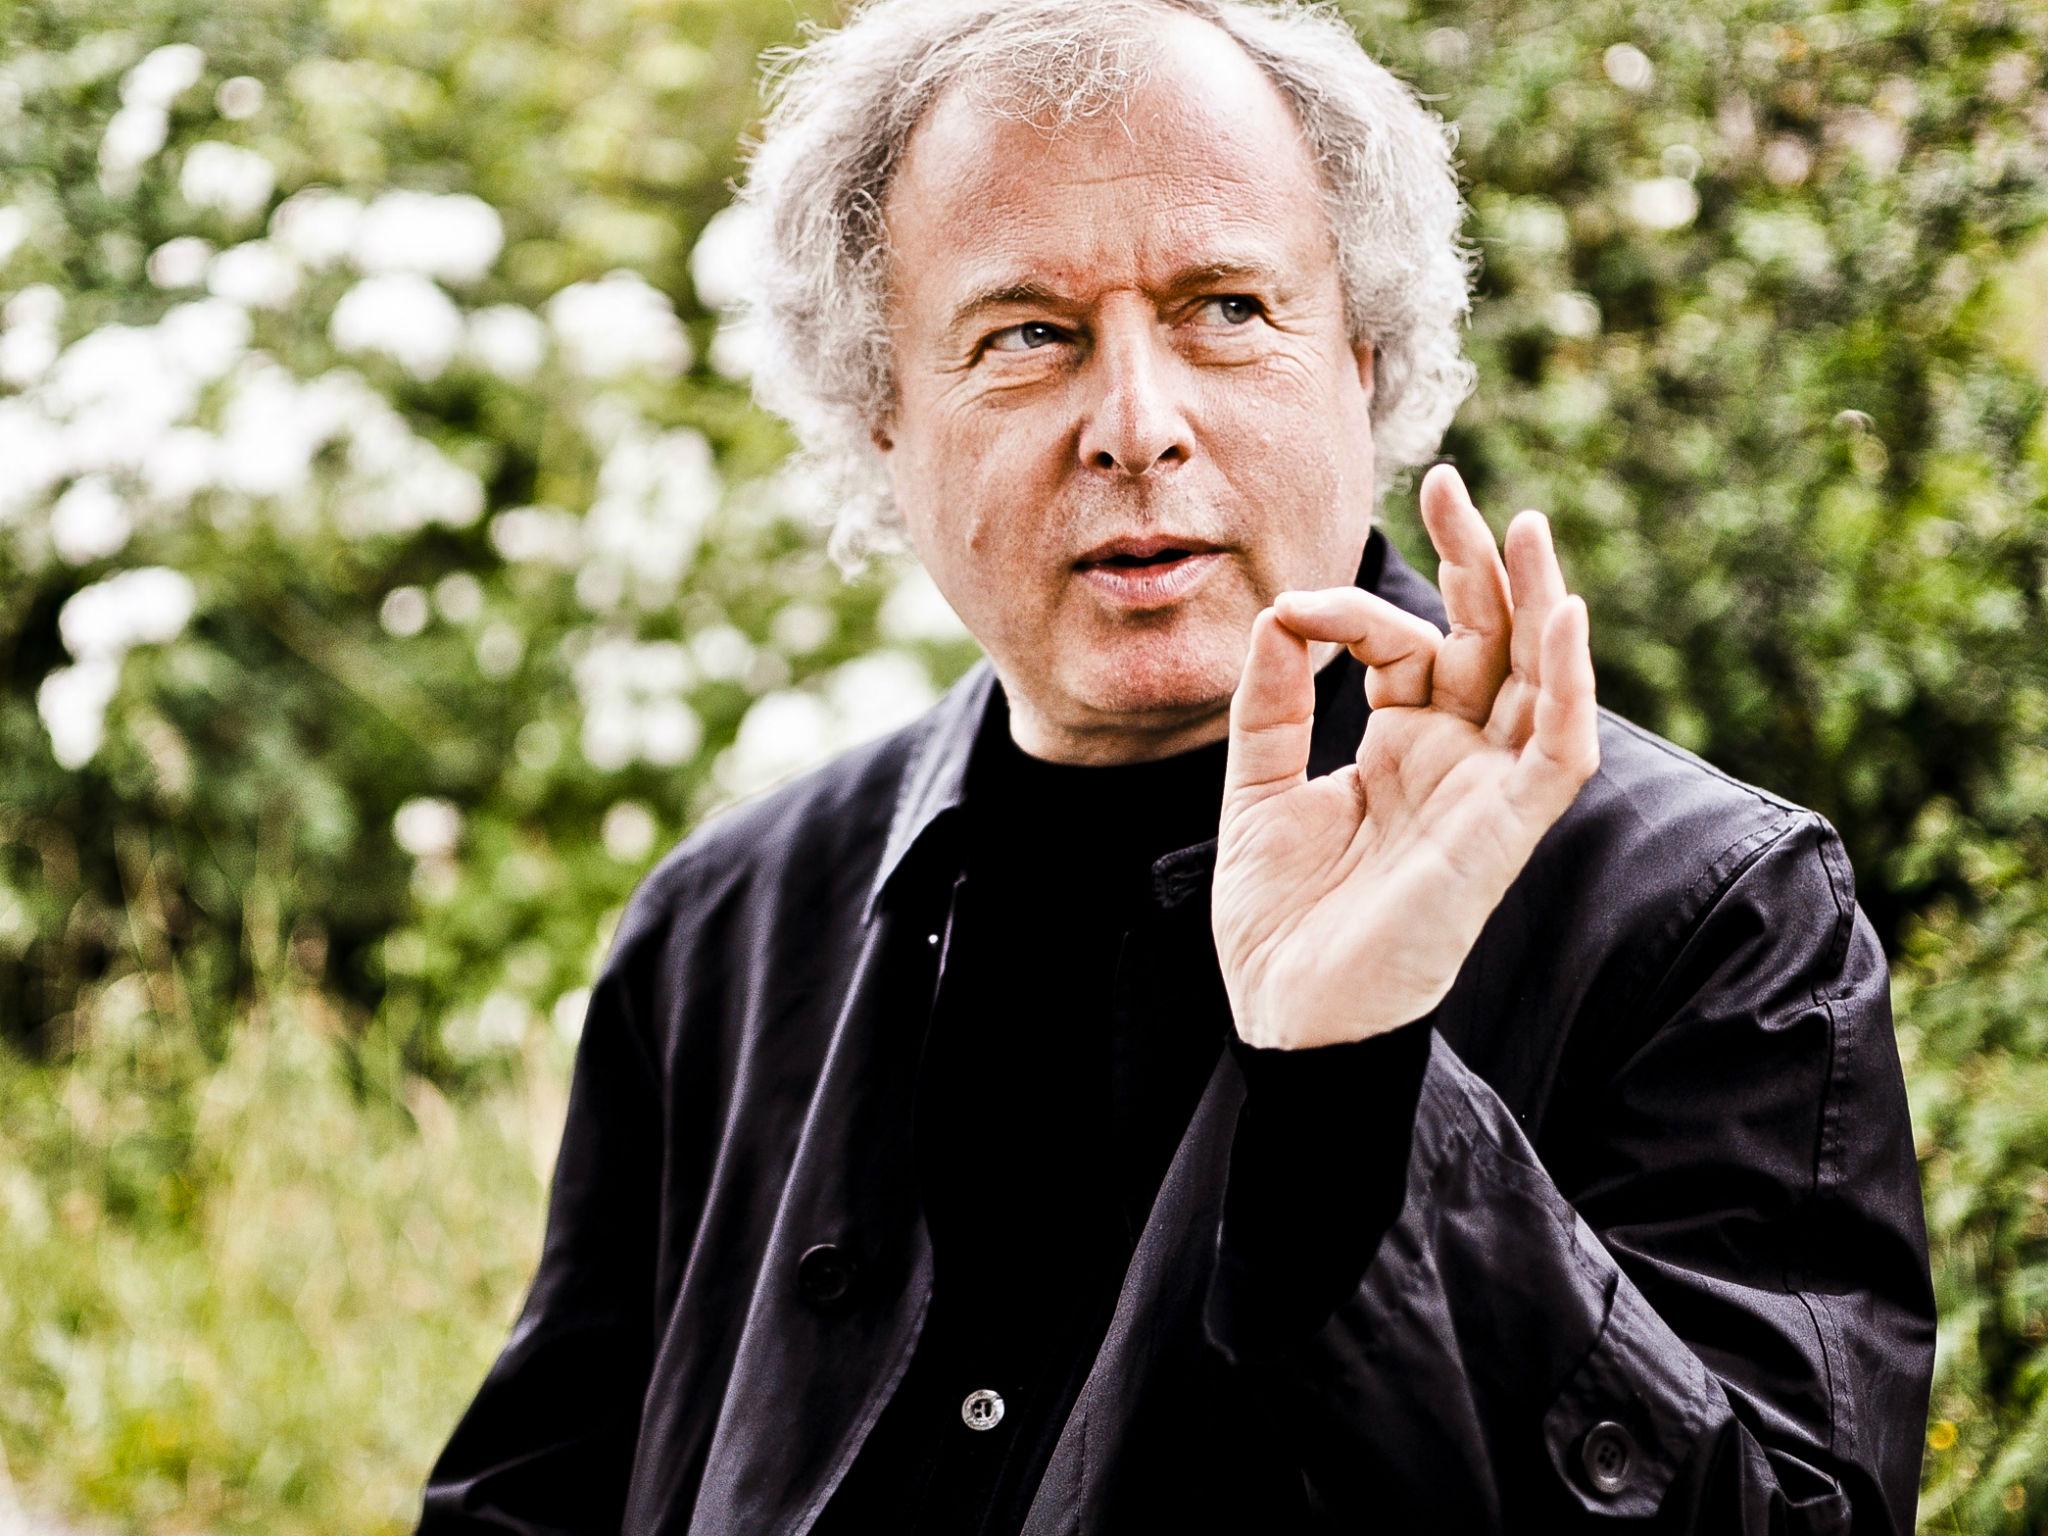 András Schiff performed at London's Wigmore Hall